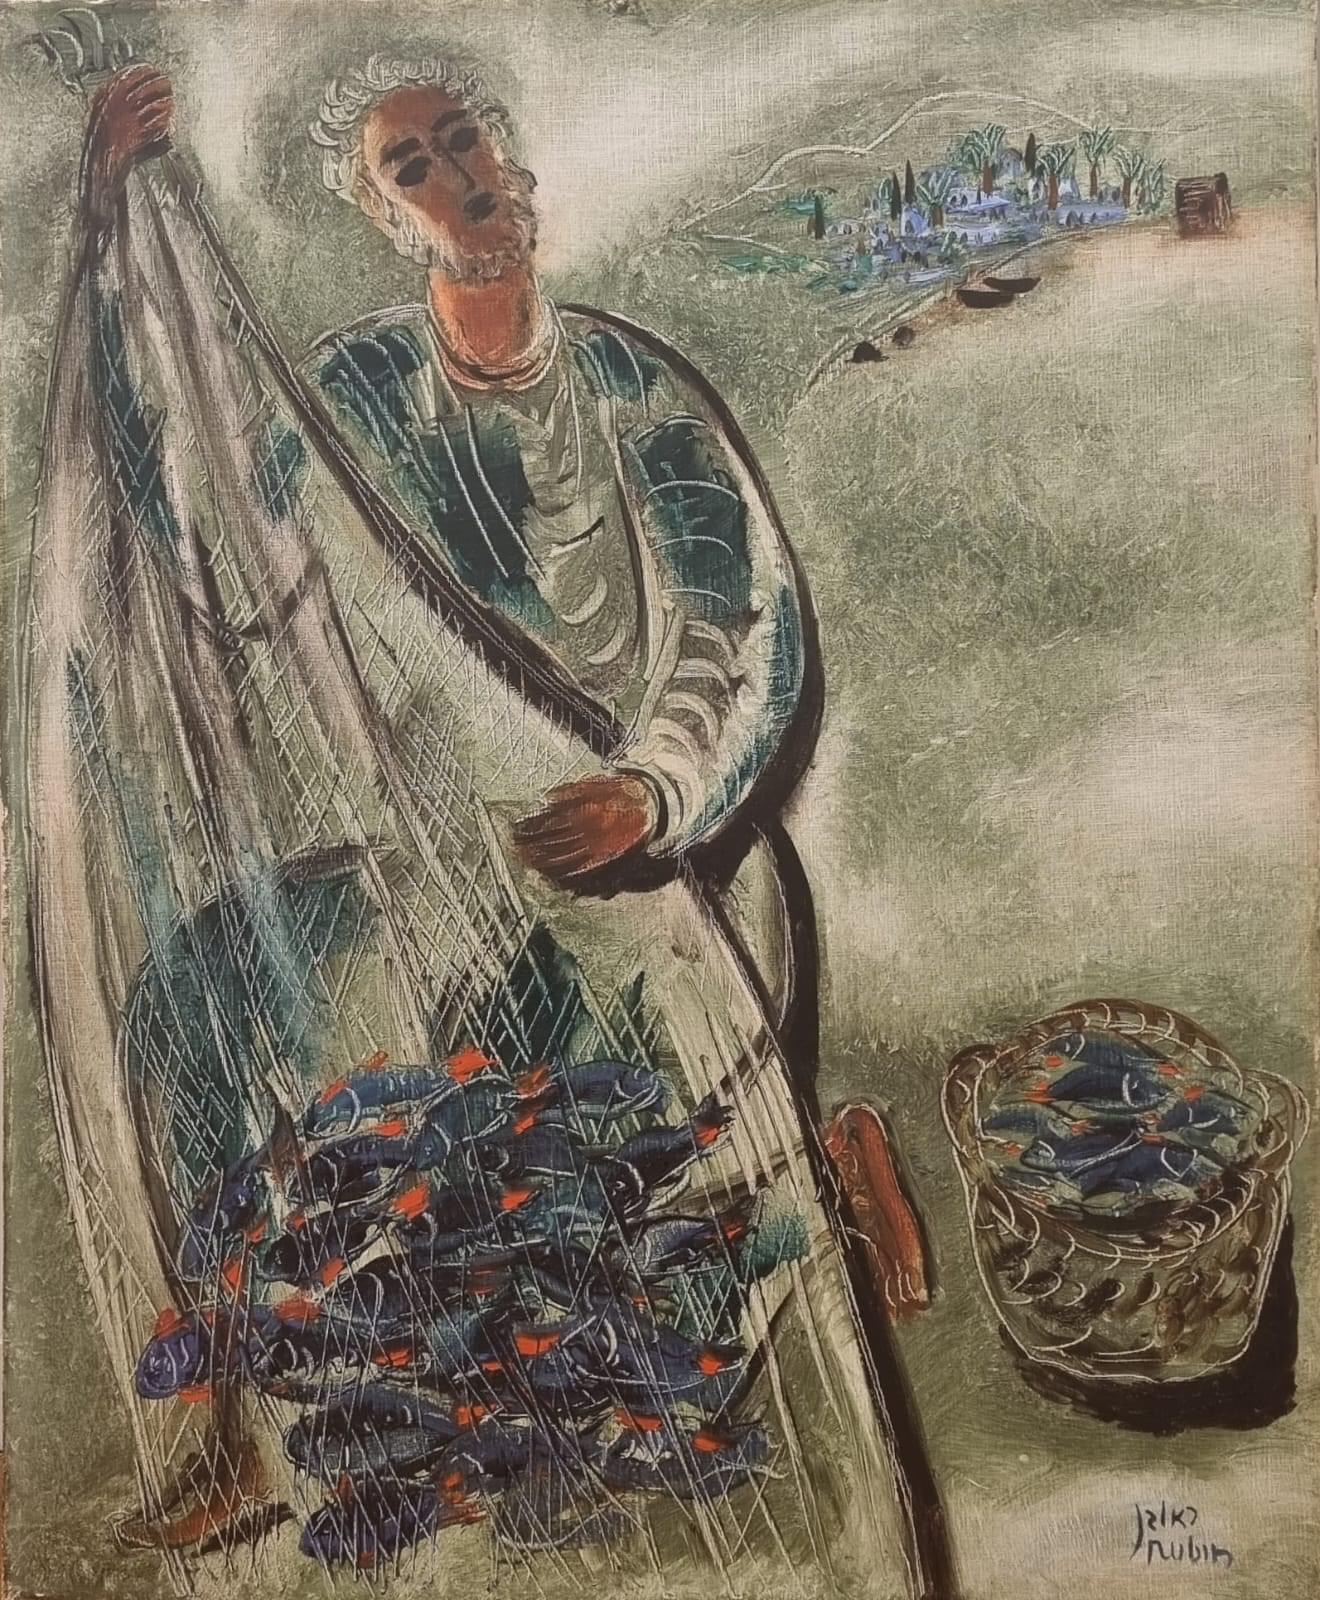 The Fisherman by Reuven Rubin. Oil on canvas, 74X61 cm.